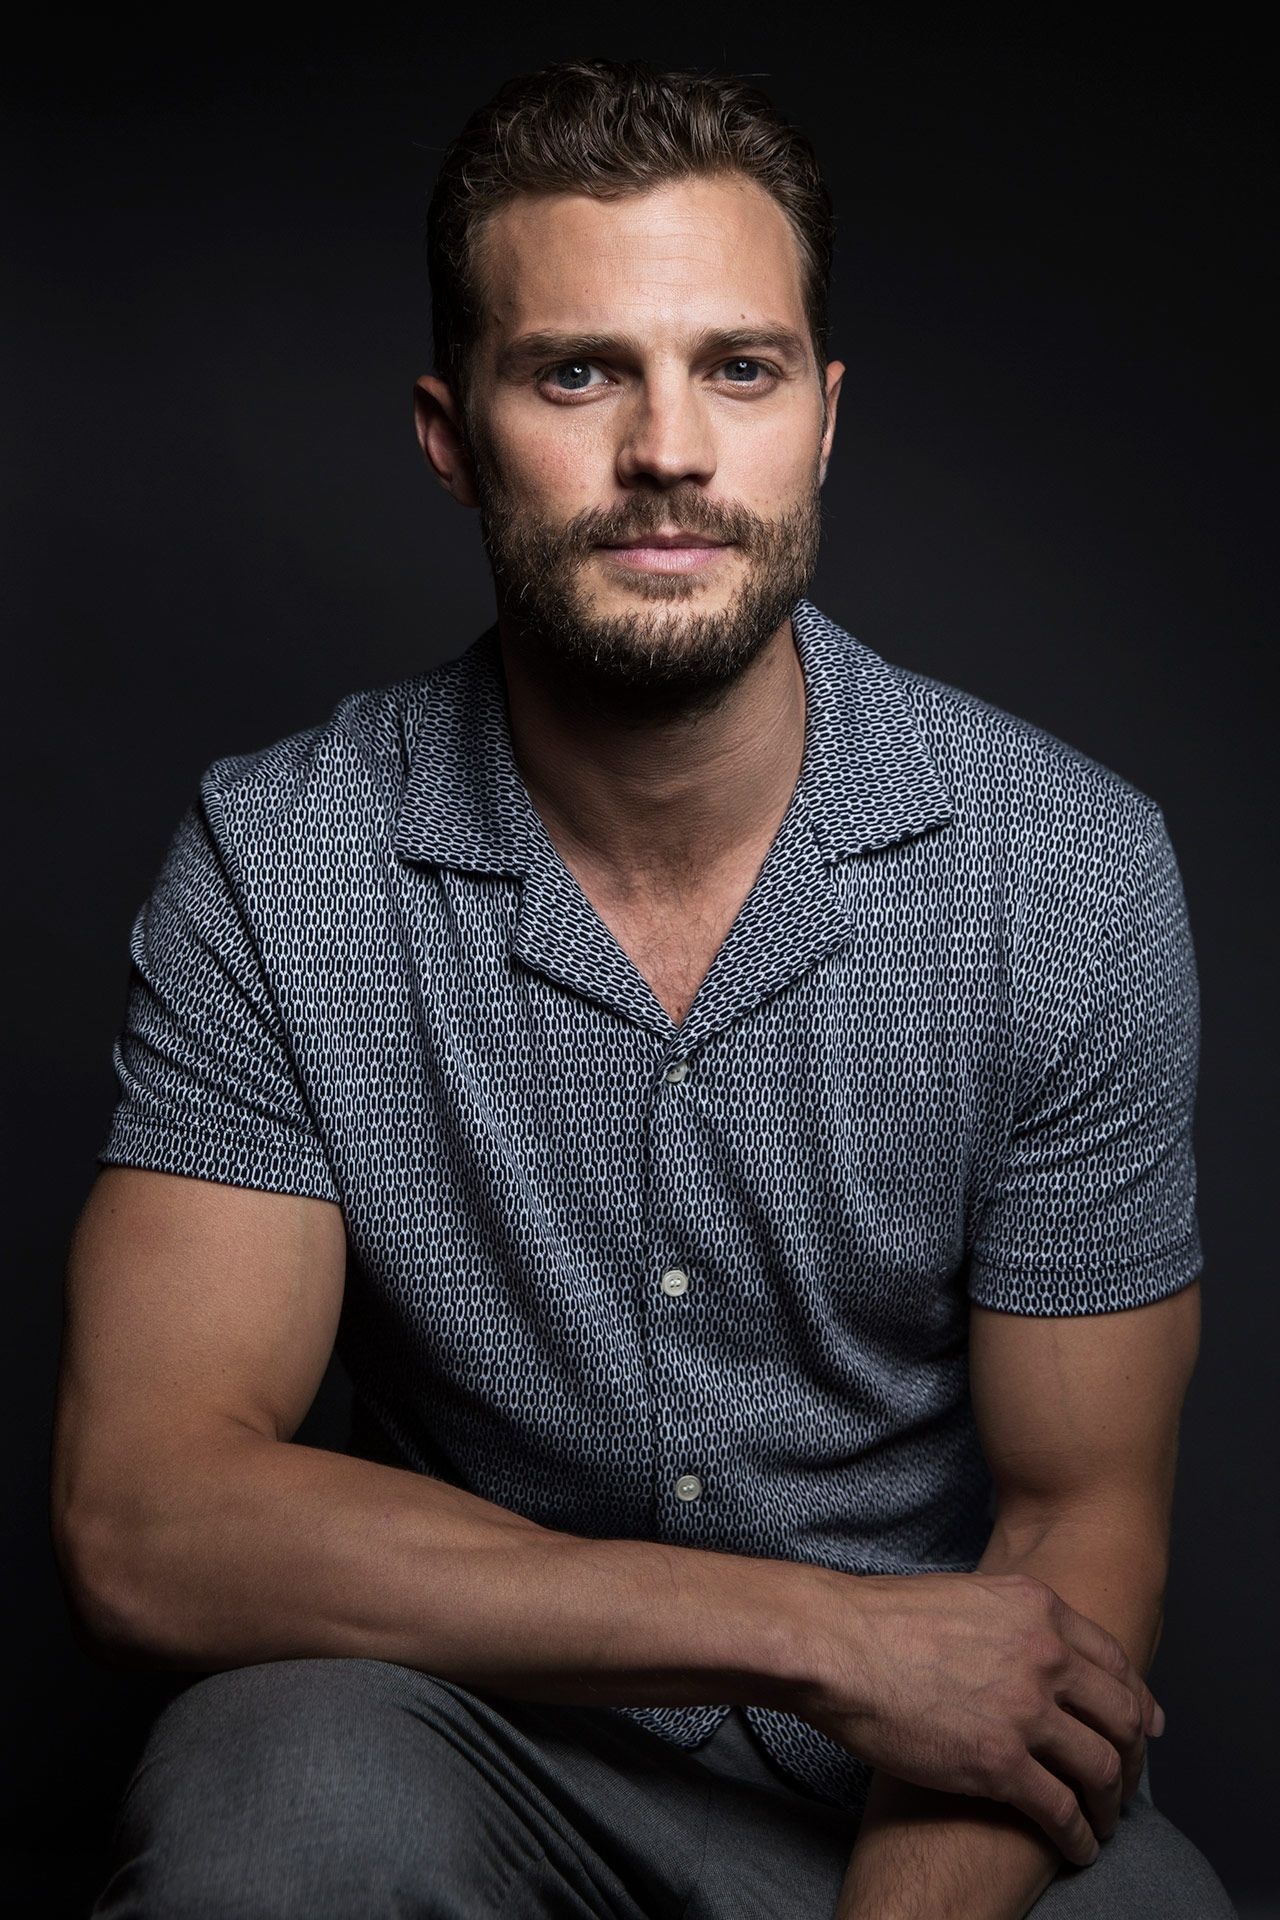 Jamie Dornan: Best known role, A serial killer Paul Spector in controversial BBC Two drama The Fall. 1280x1920 HD Wallpaper.